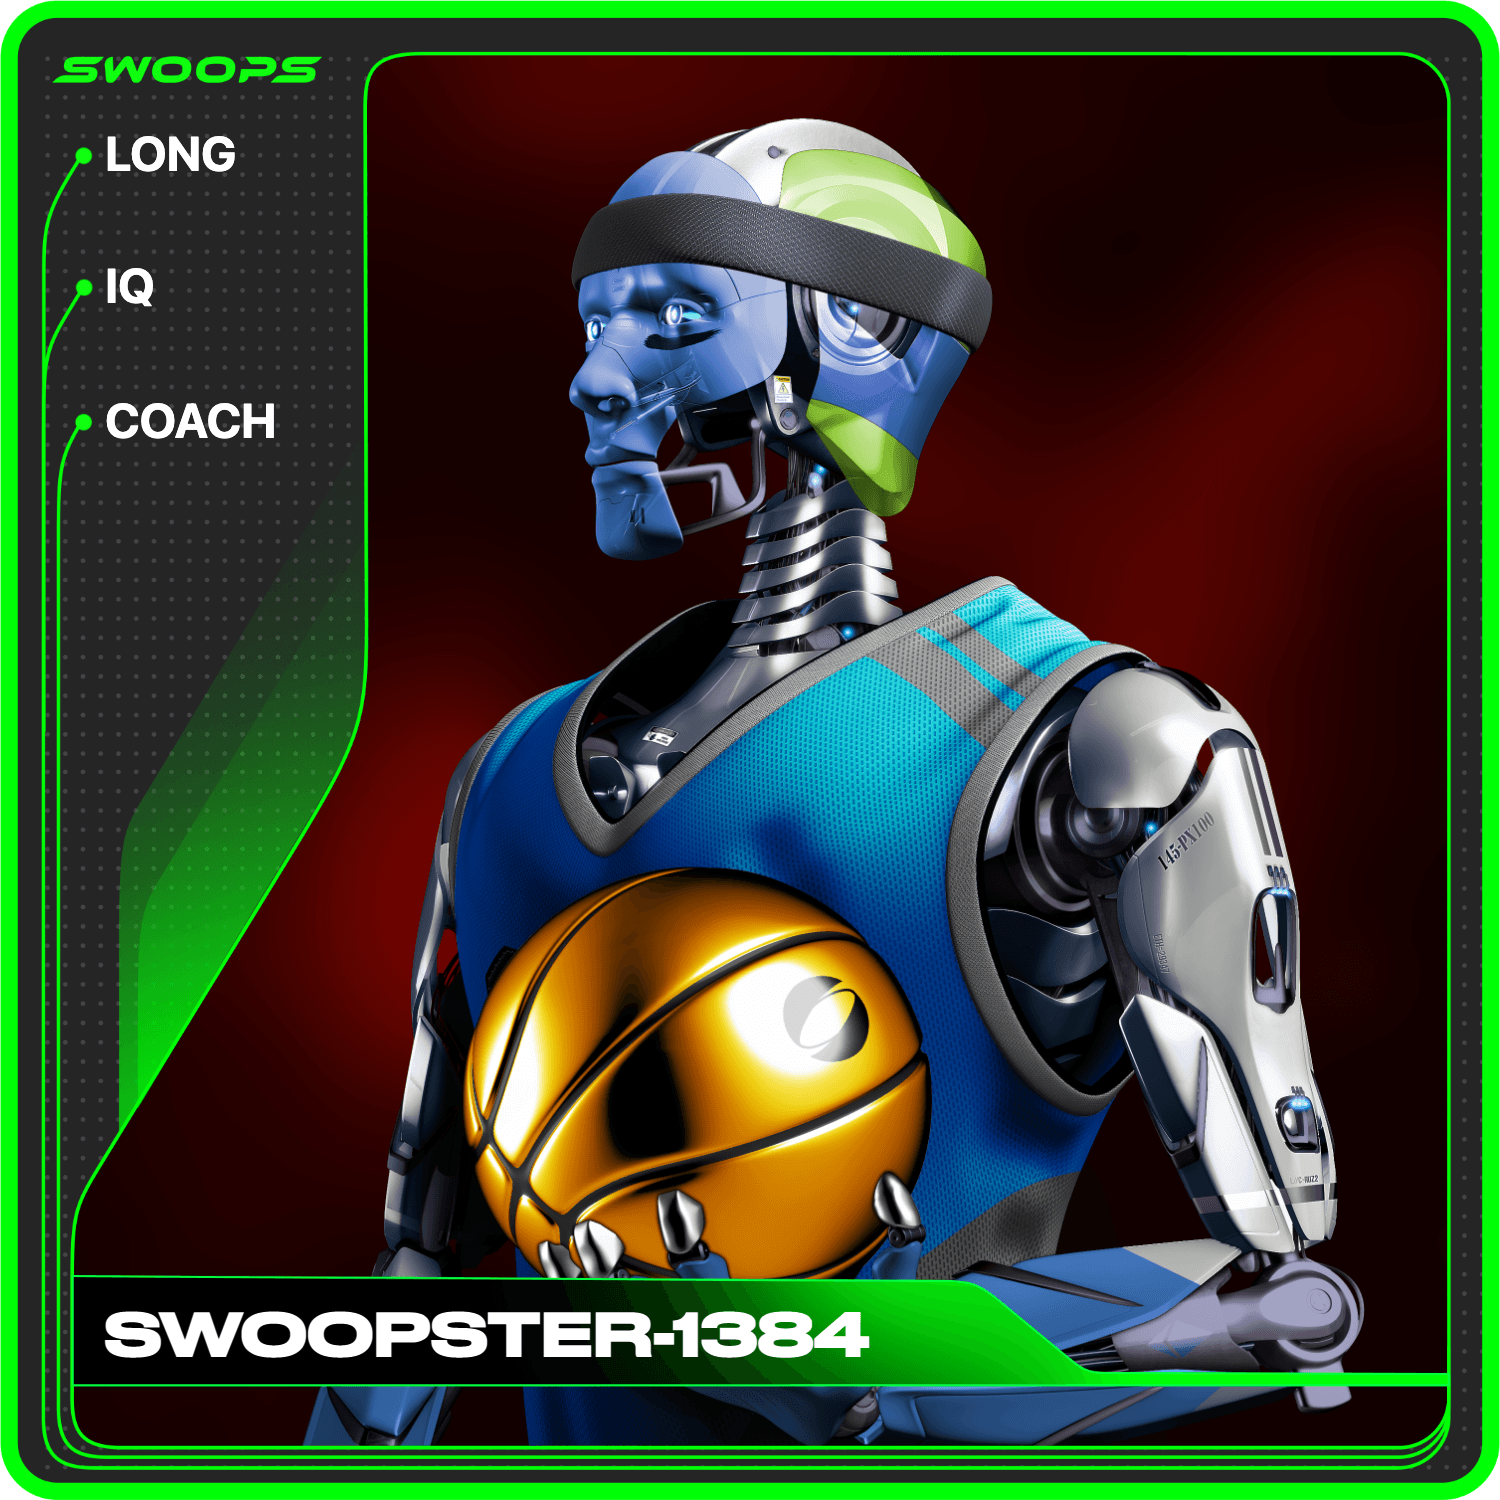 SWOOPSTER-1384